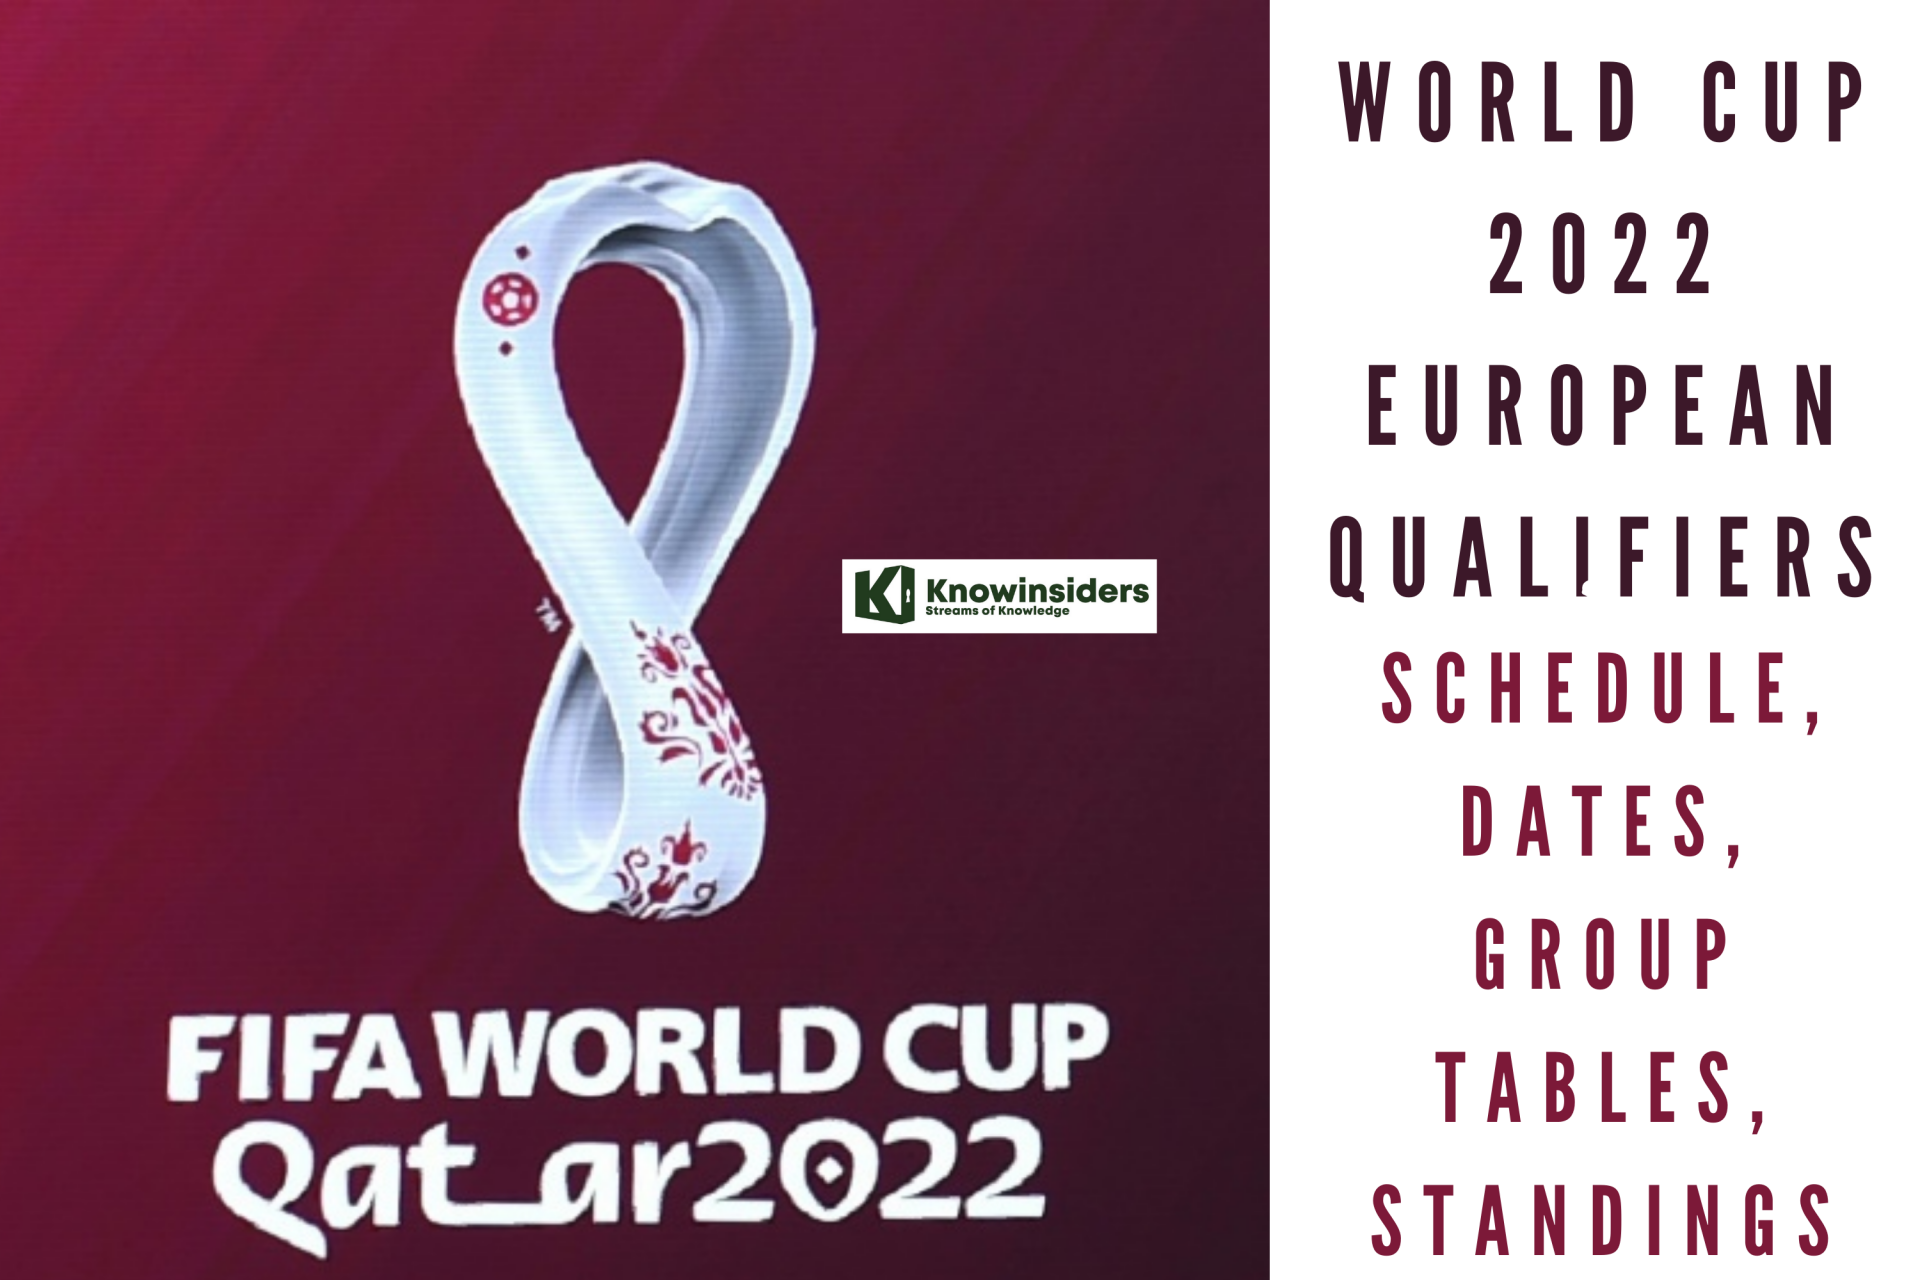 World Cup 2022 European Qualifiers: Dates, Schedule, Group Tables, Standings